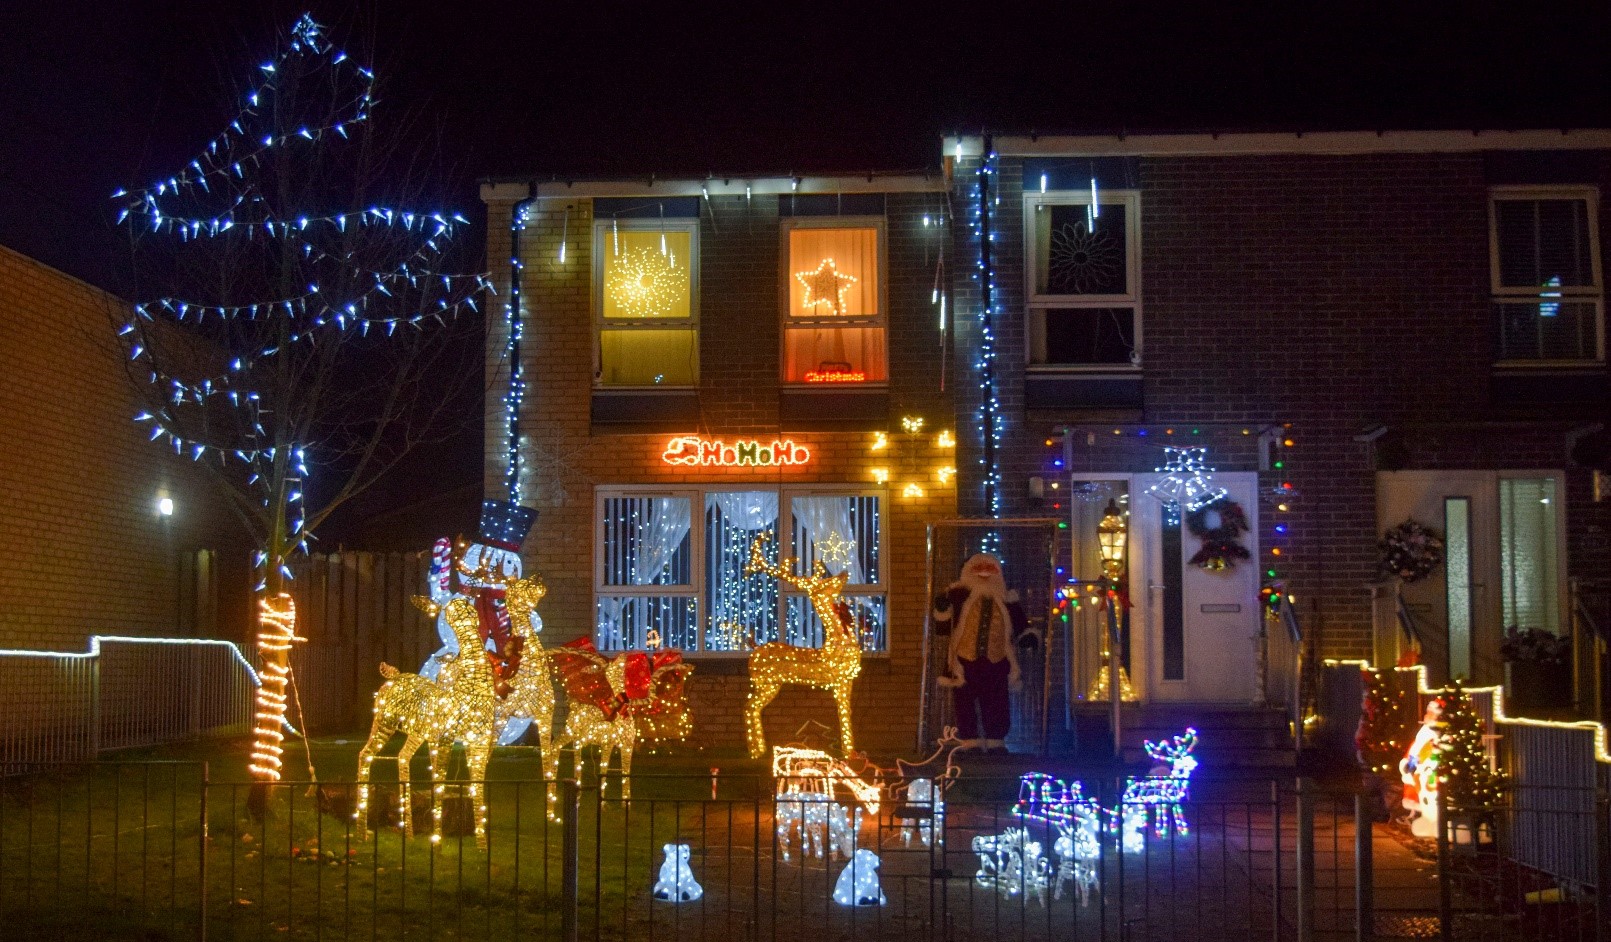 Wellhouse Christmas lights competition winners announced